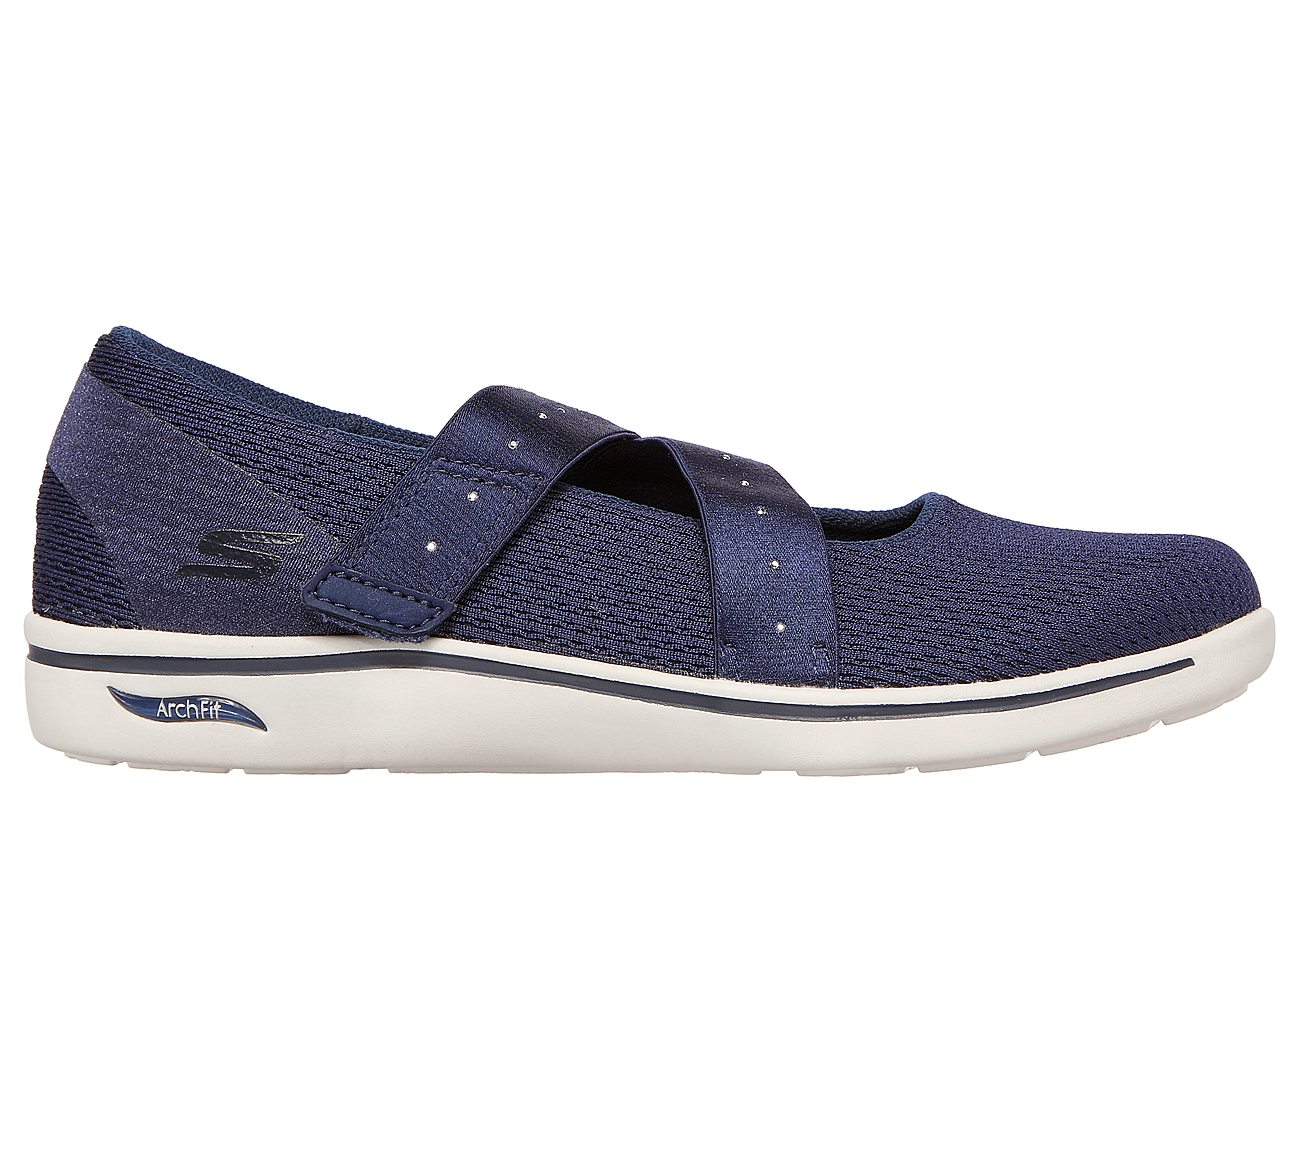 ARCH FIT UPLIFT - MILESTONE, NNNAVY Footwear Lateral View